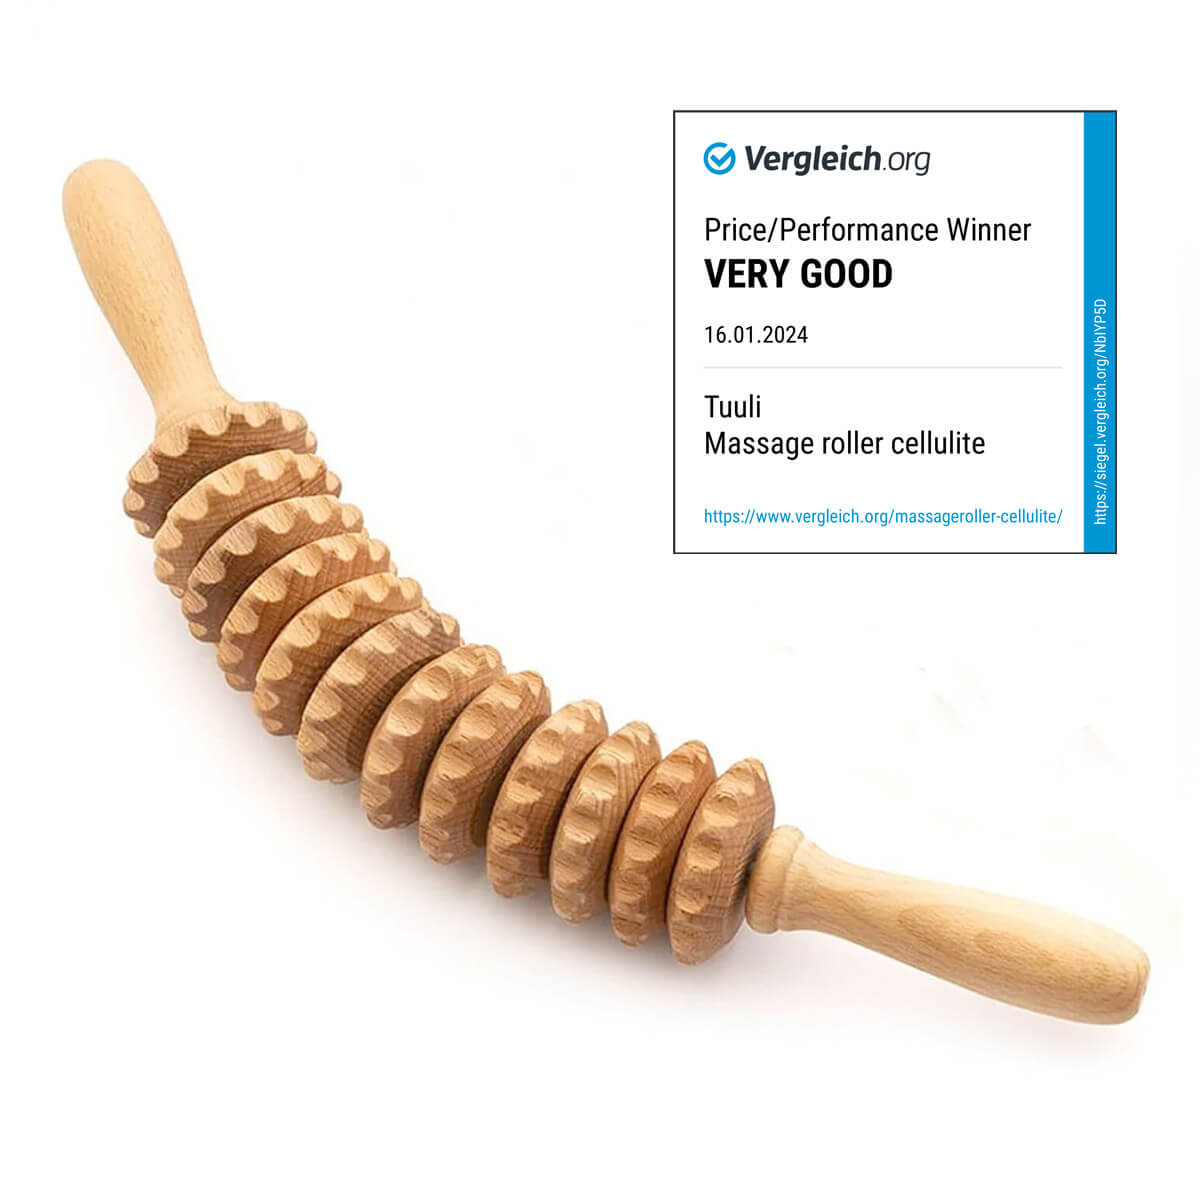 Anti Cellulite Massager Roller Rated with the highest rating by Vergleich.org